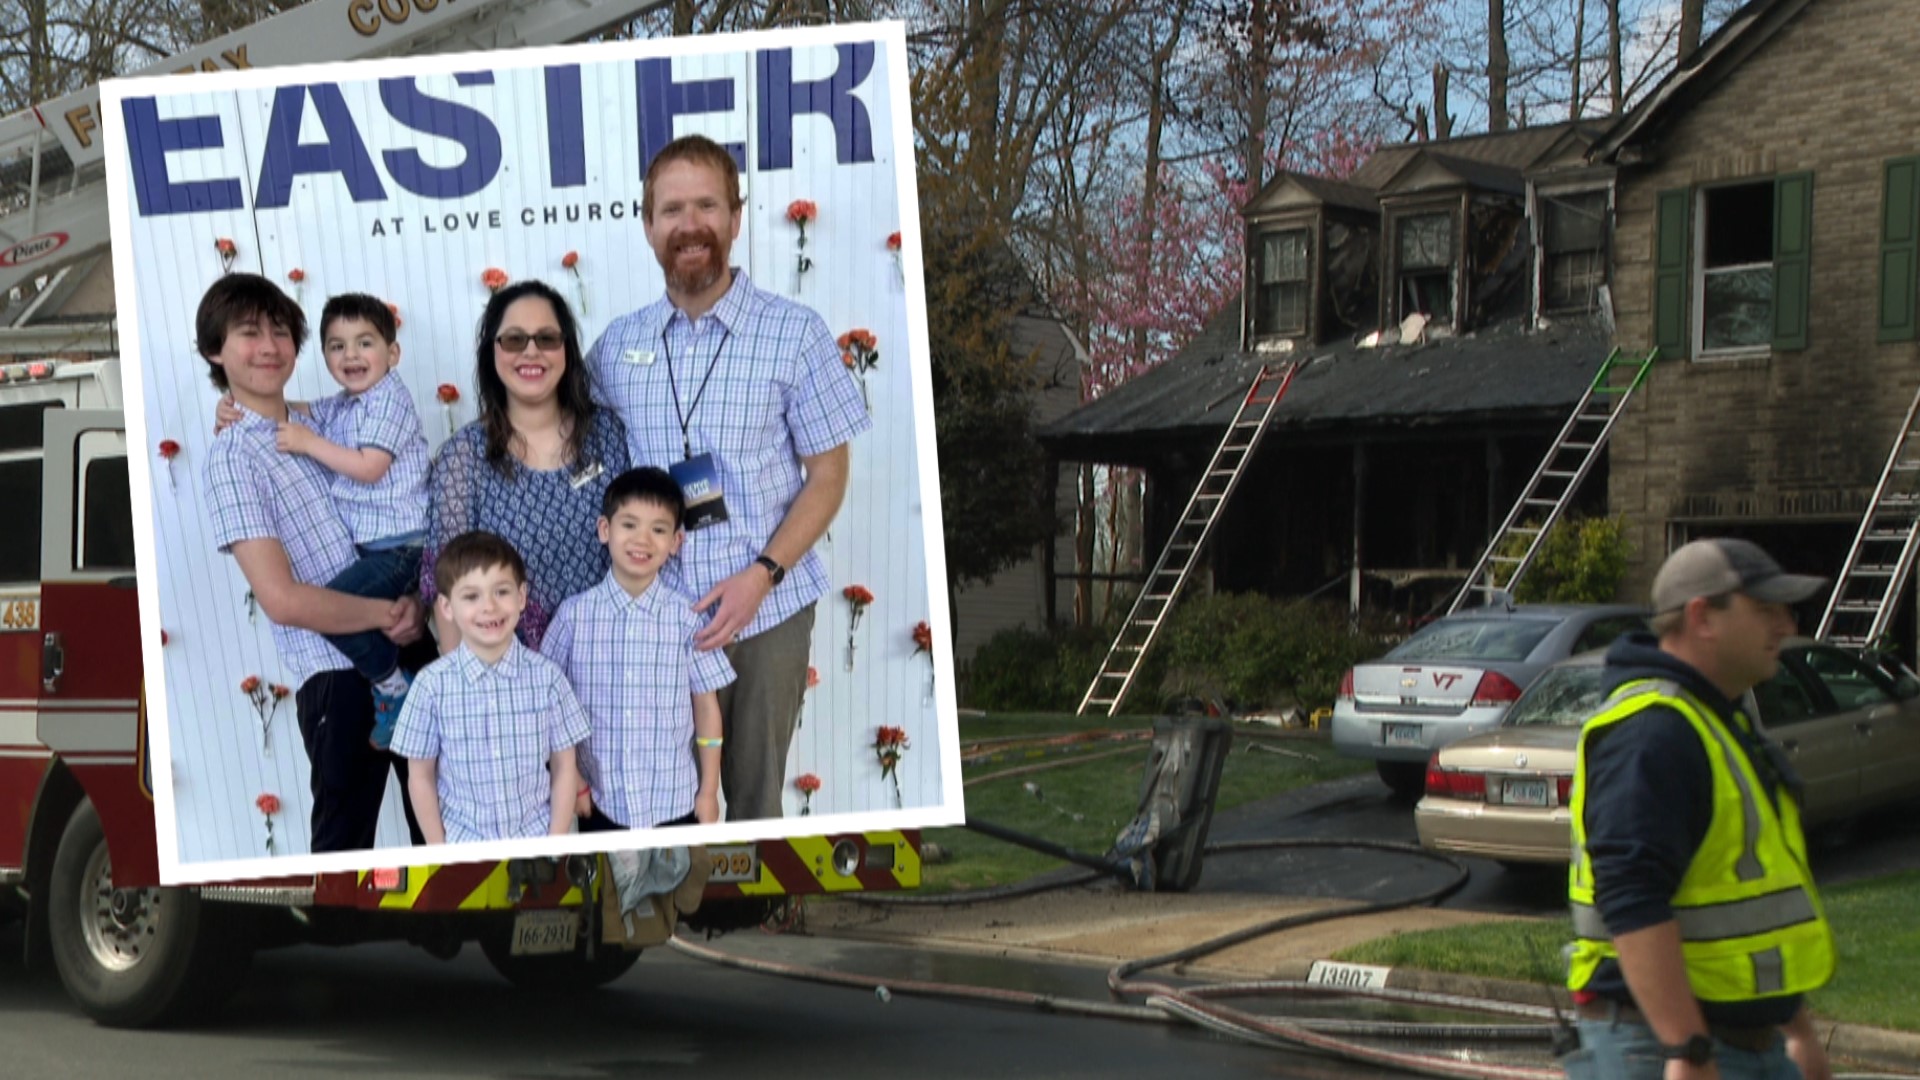 Five people were taken to area hospitals after a fire in a home in Fairfax County on Wednesday morning. Two of them were in critical condition.